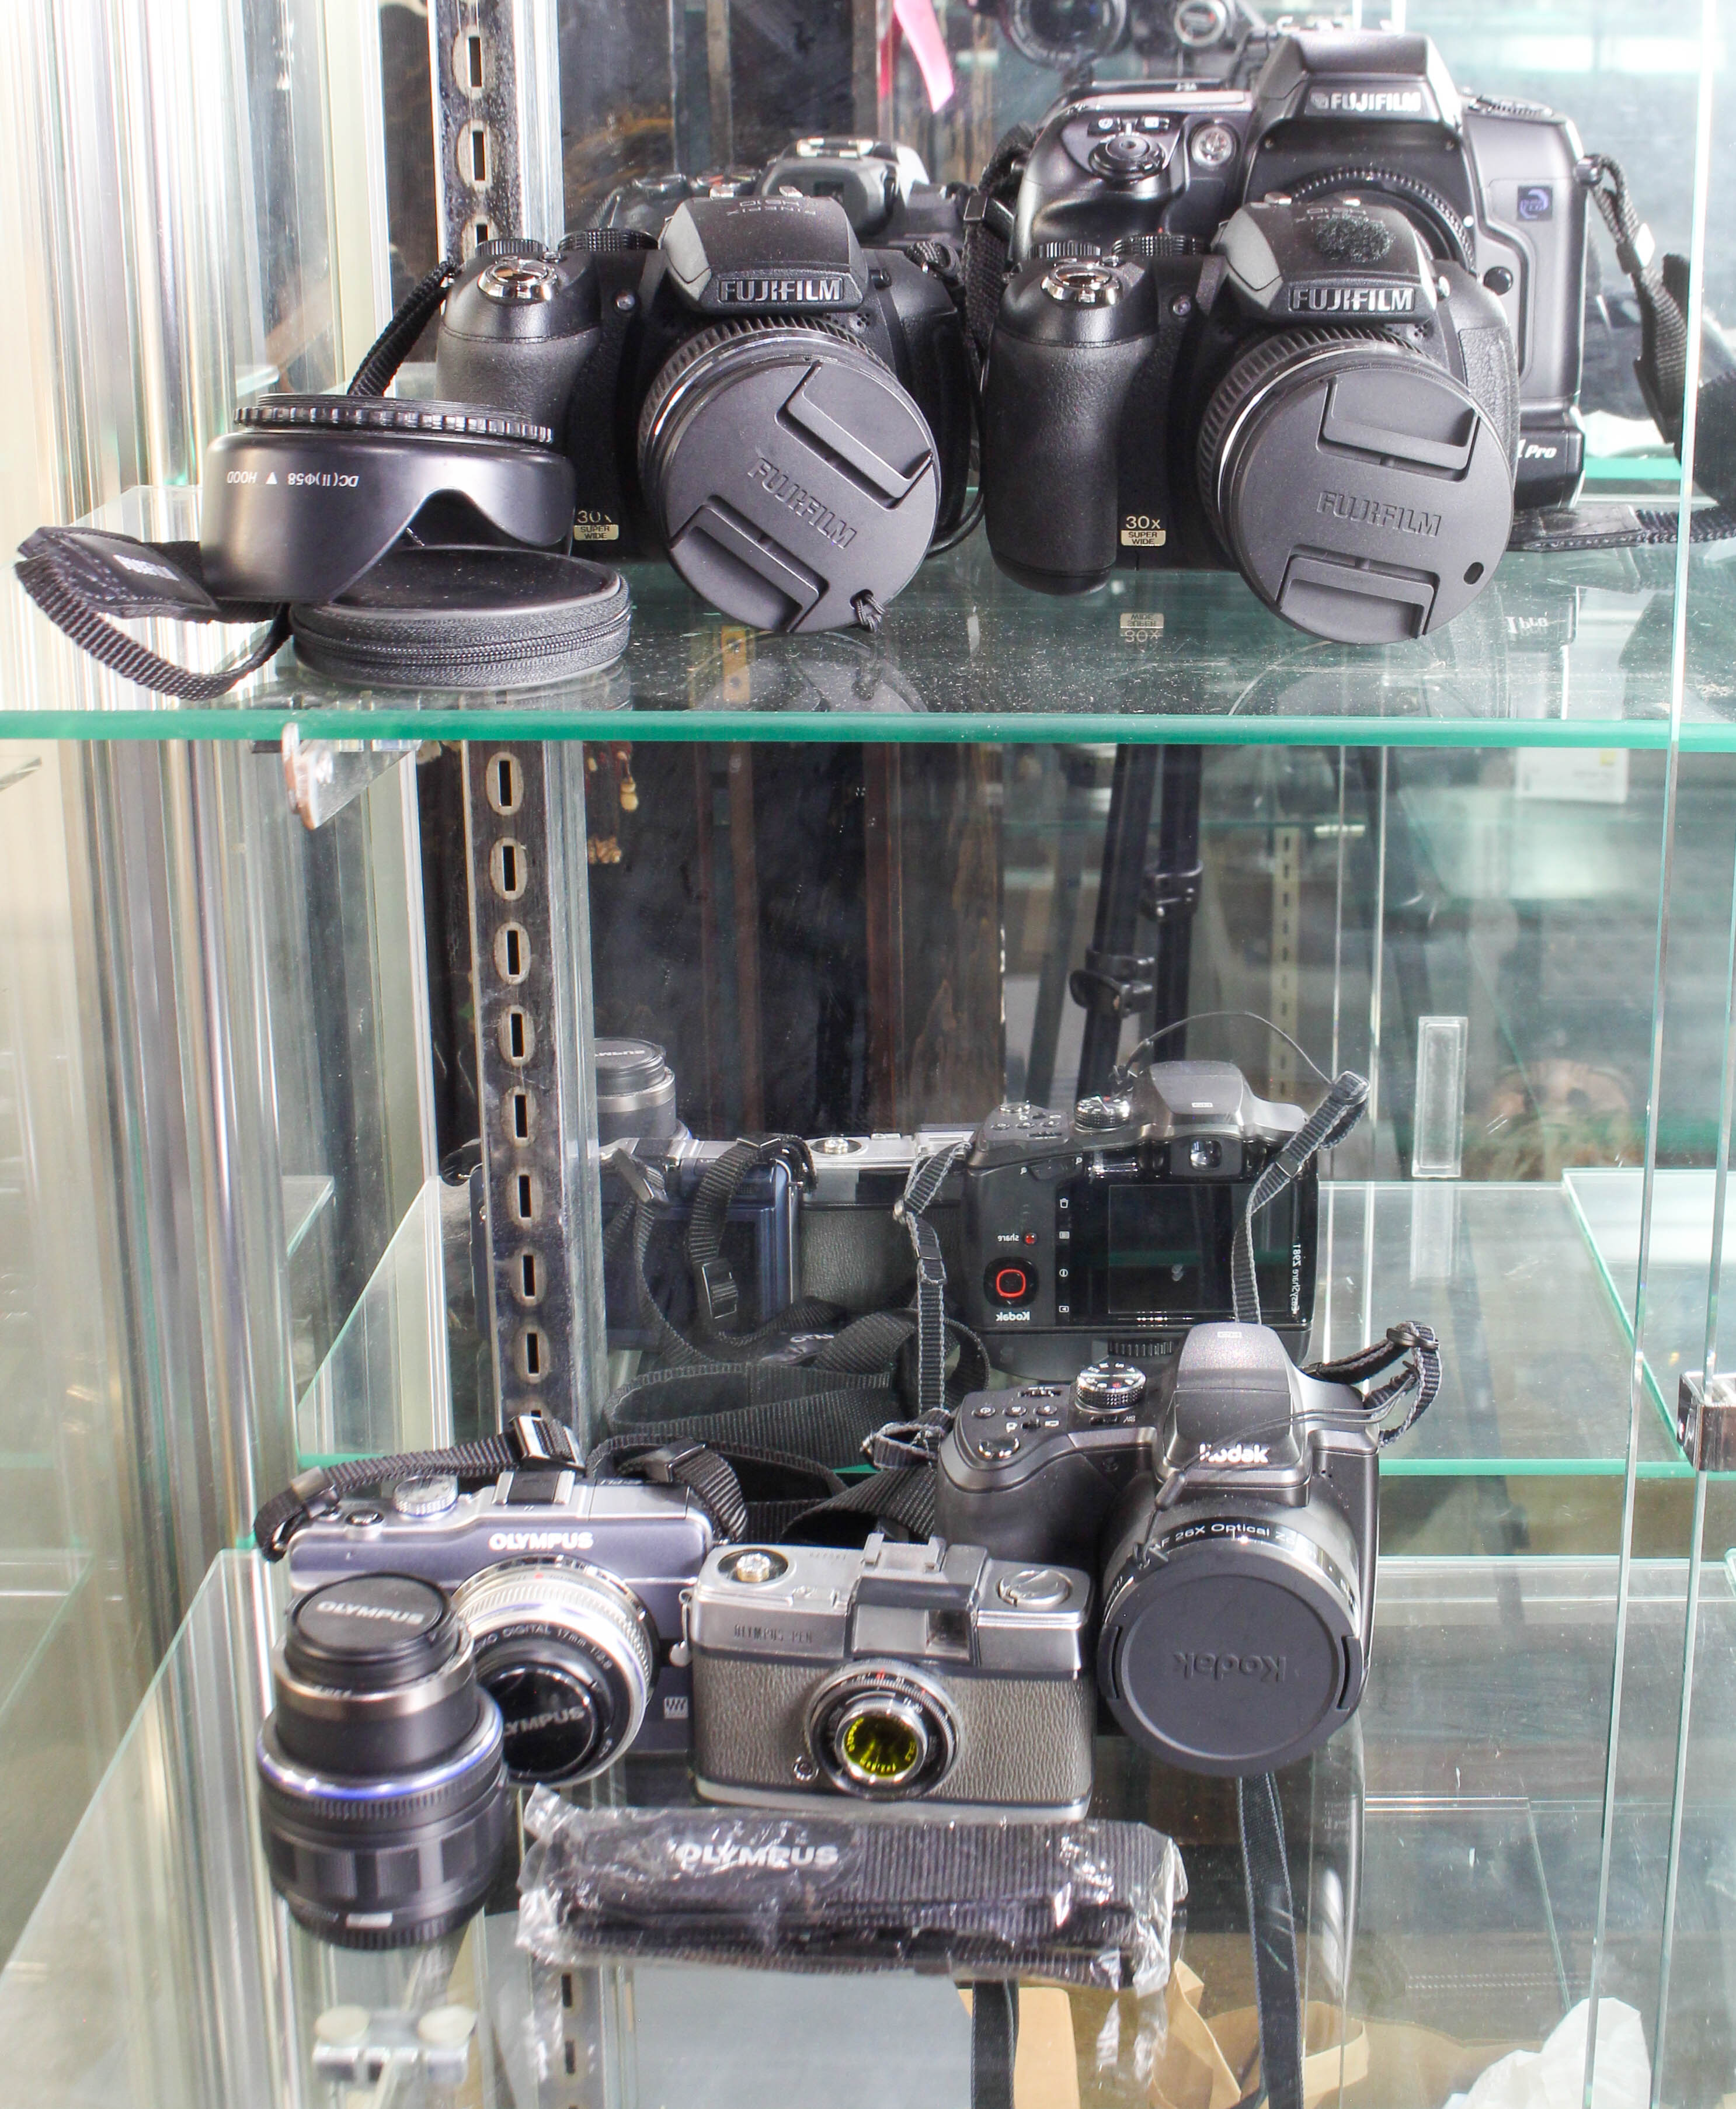  LOT OF 7 2 OLYMPUS CAMERAS  3a622a